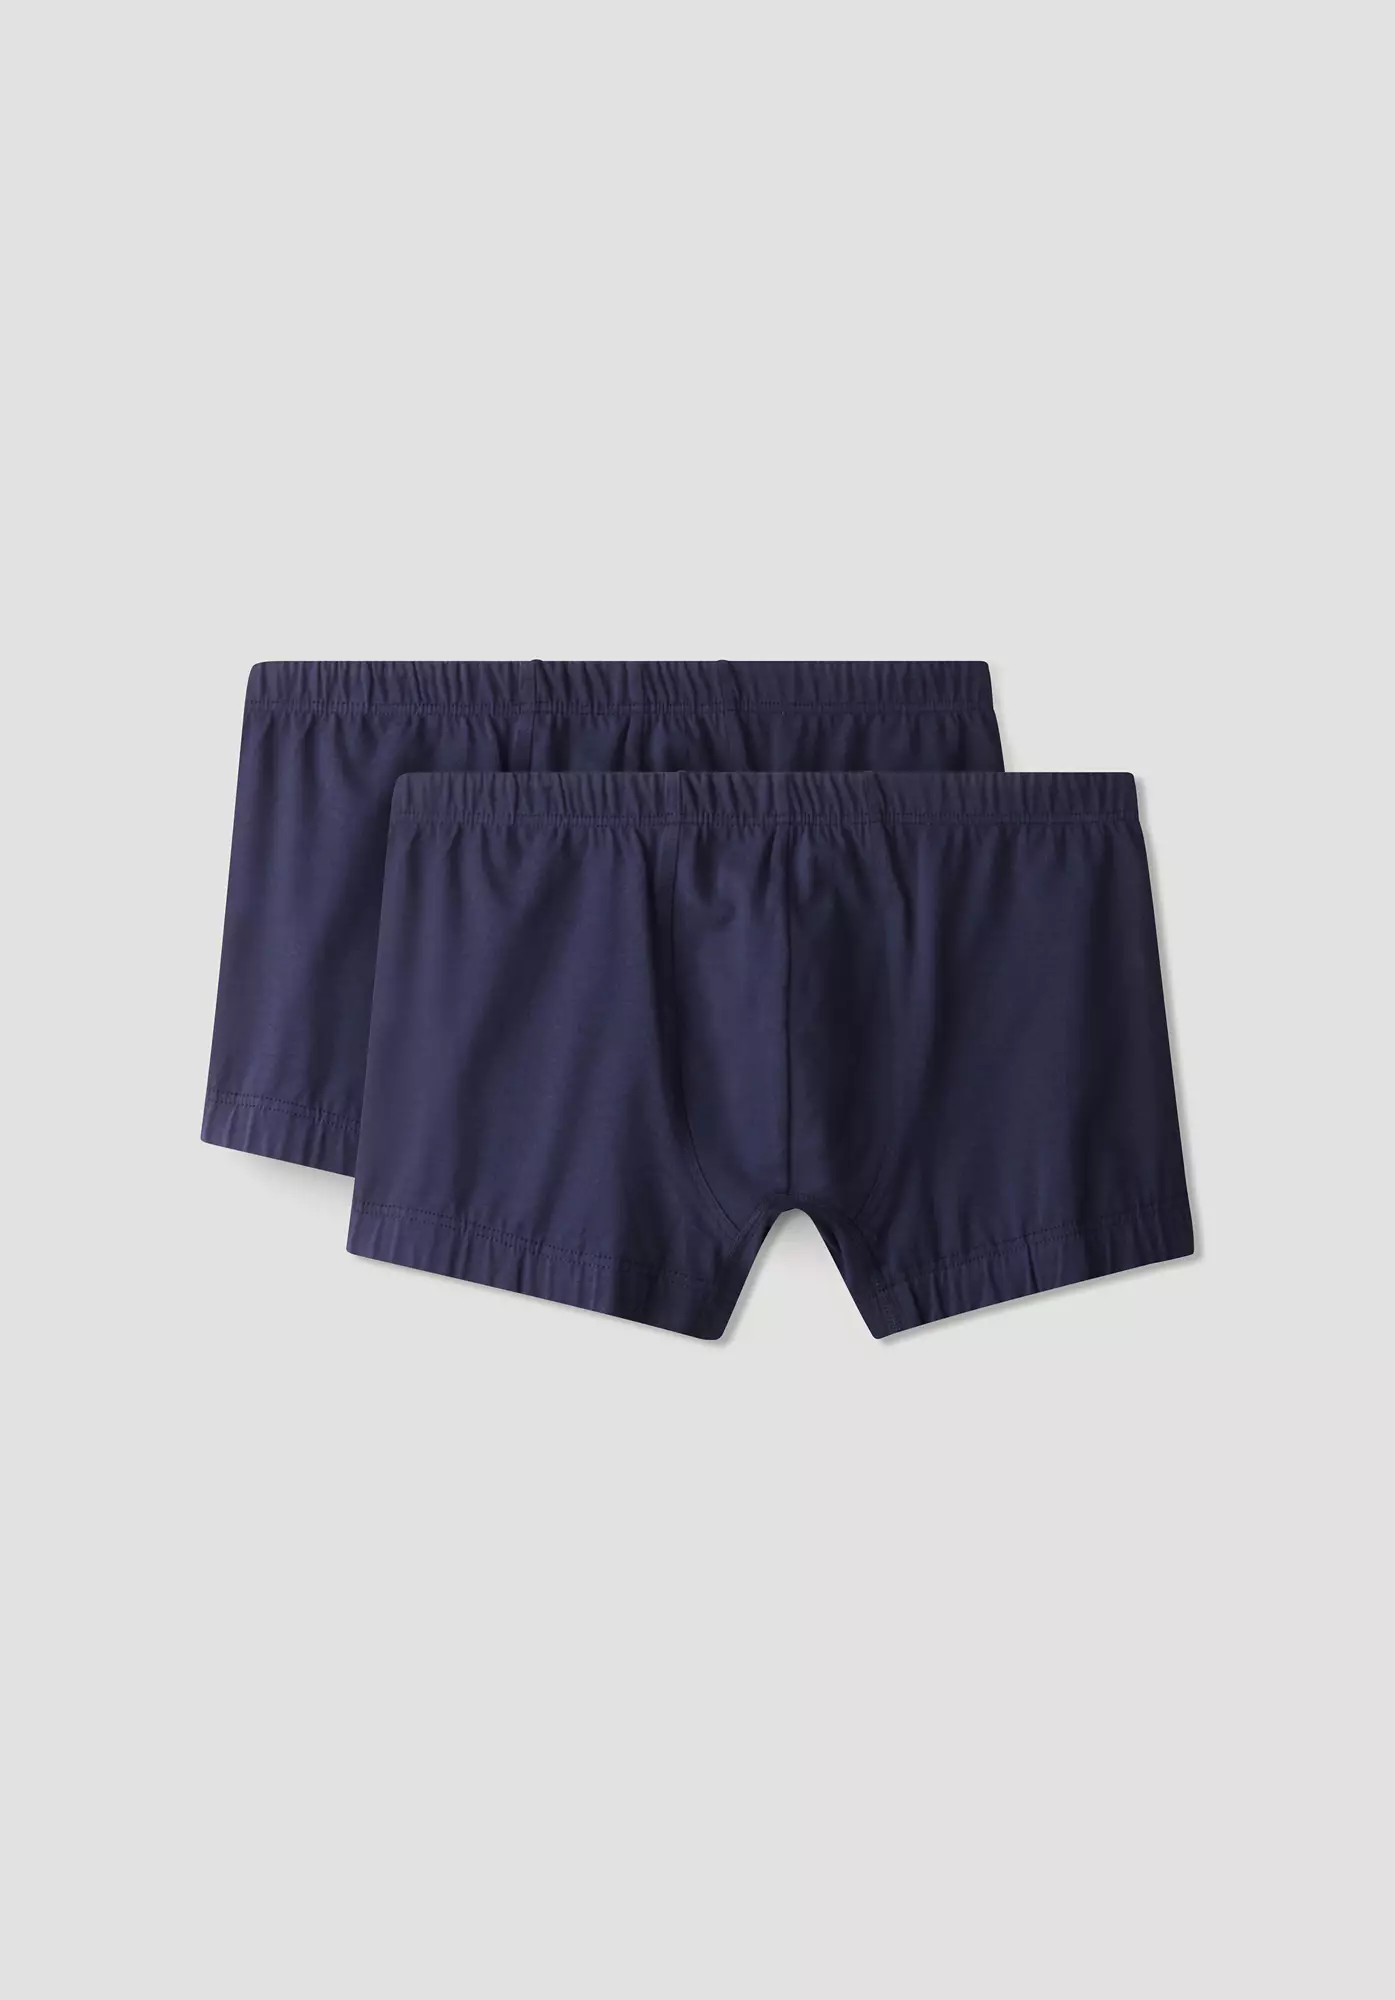 PureLUX pants in a set of 2 made of organic cotton - 4